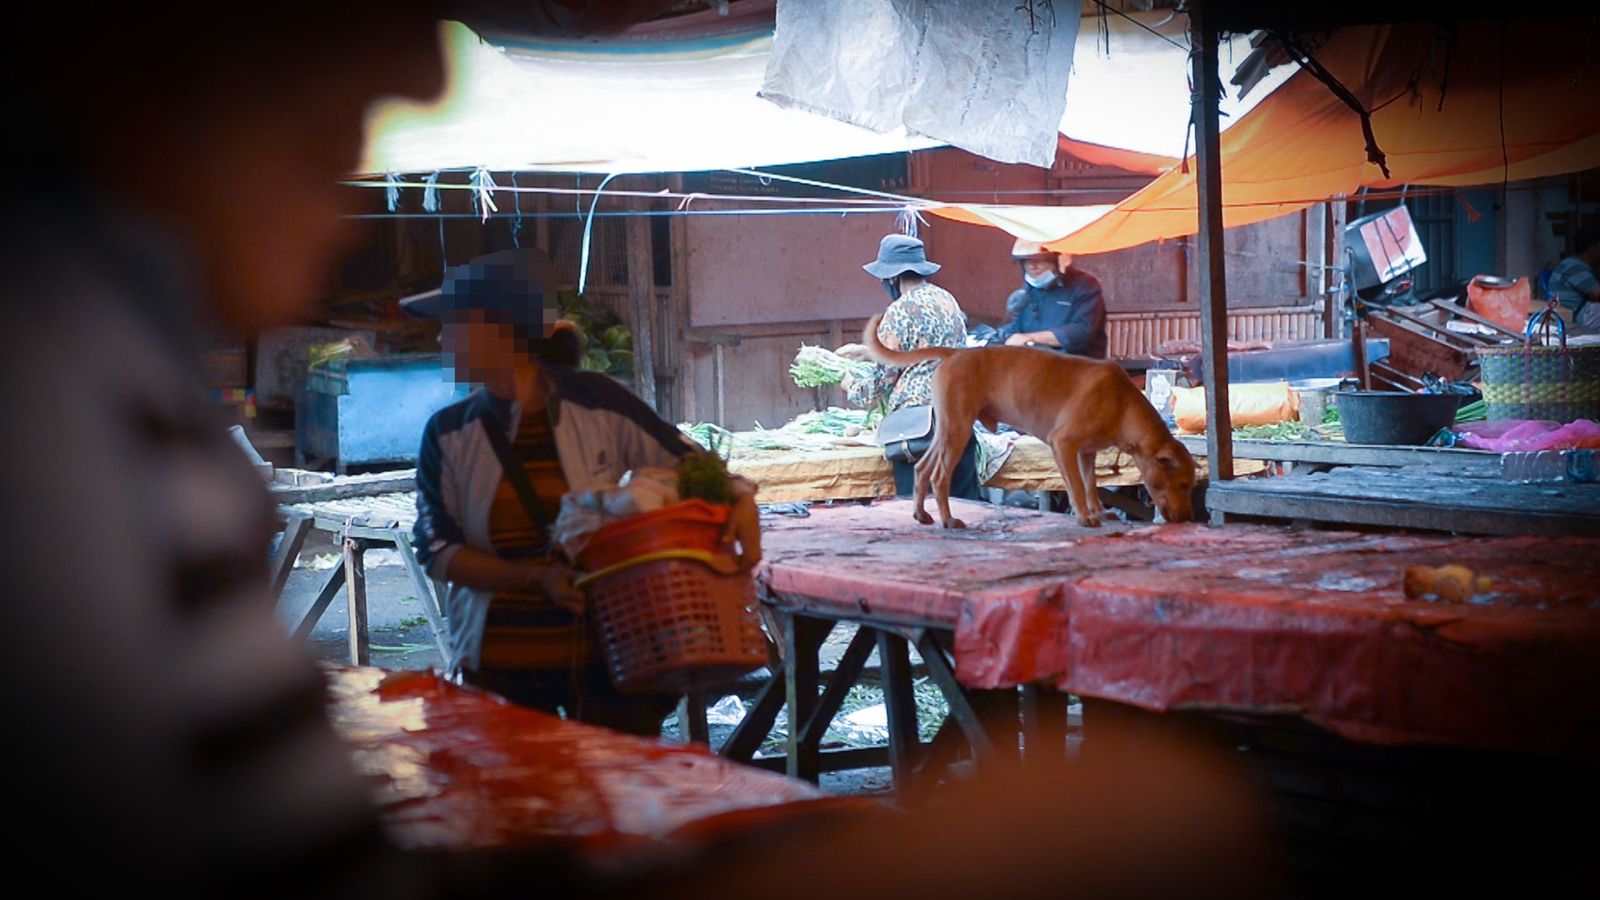 Indonesia's notorious Tomohon animal market to stop selling dog and cat meat